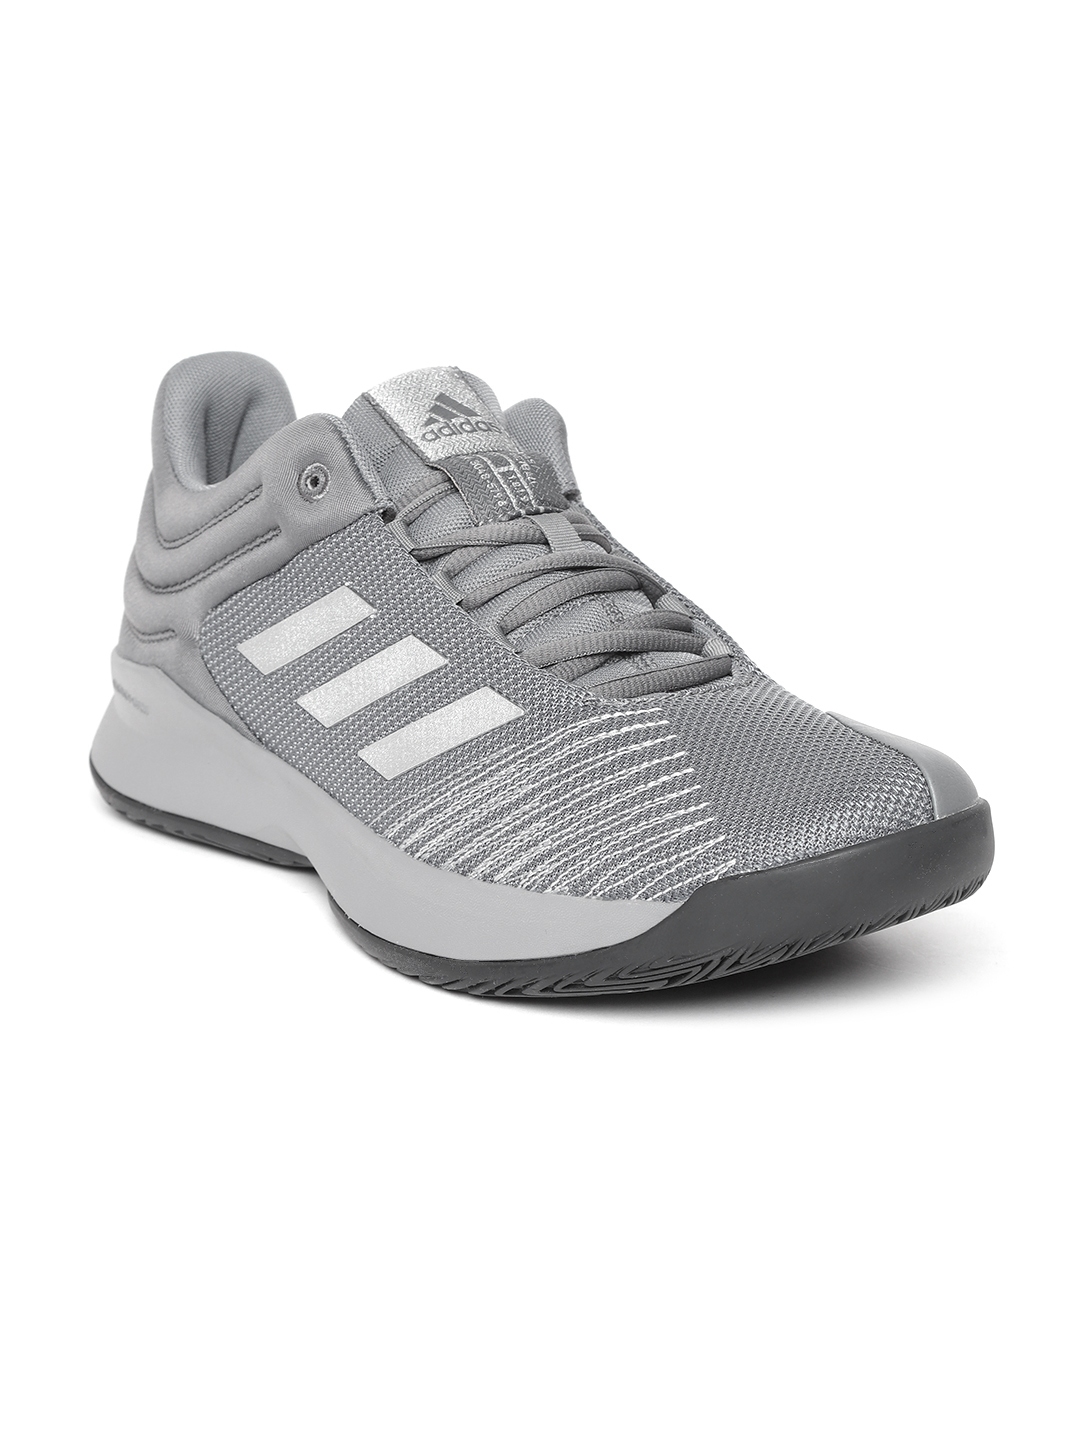 Buy Adidas Men Charcoal Grey Pro Spark 2018 Low Basketball Shoes - Sports  Shoes For Men 8618331 | Myntra